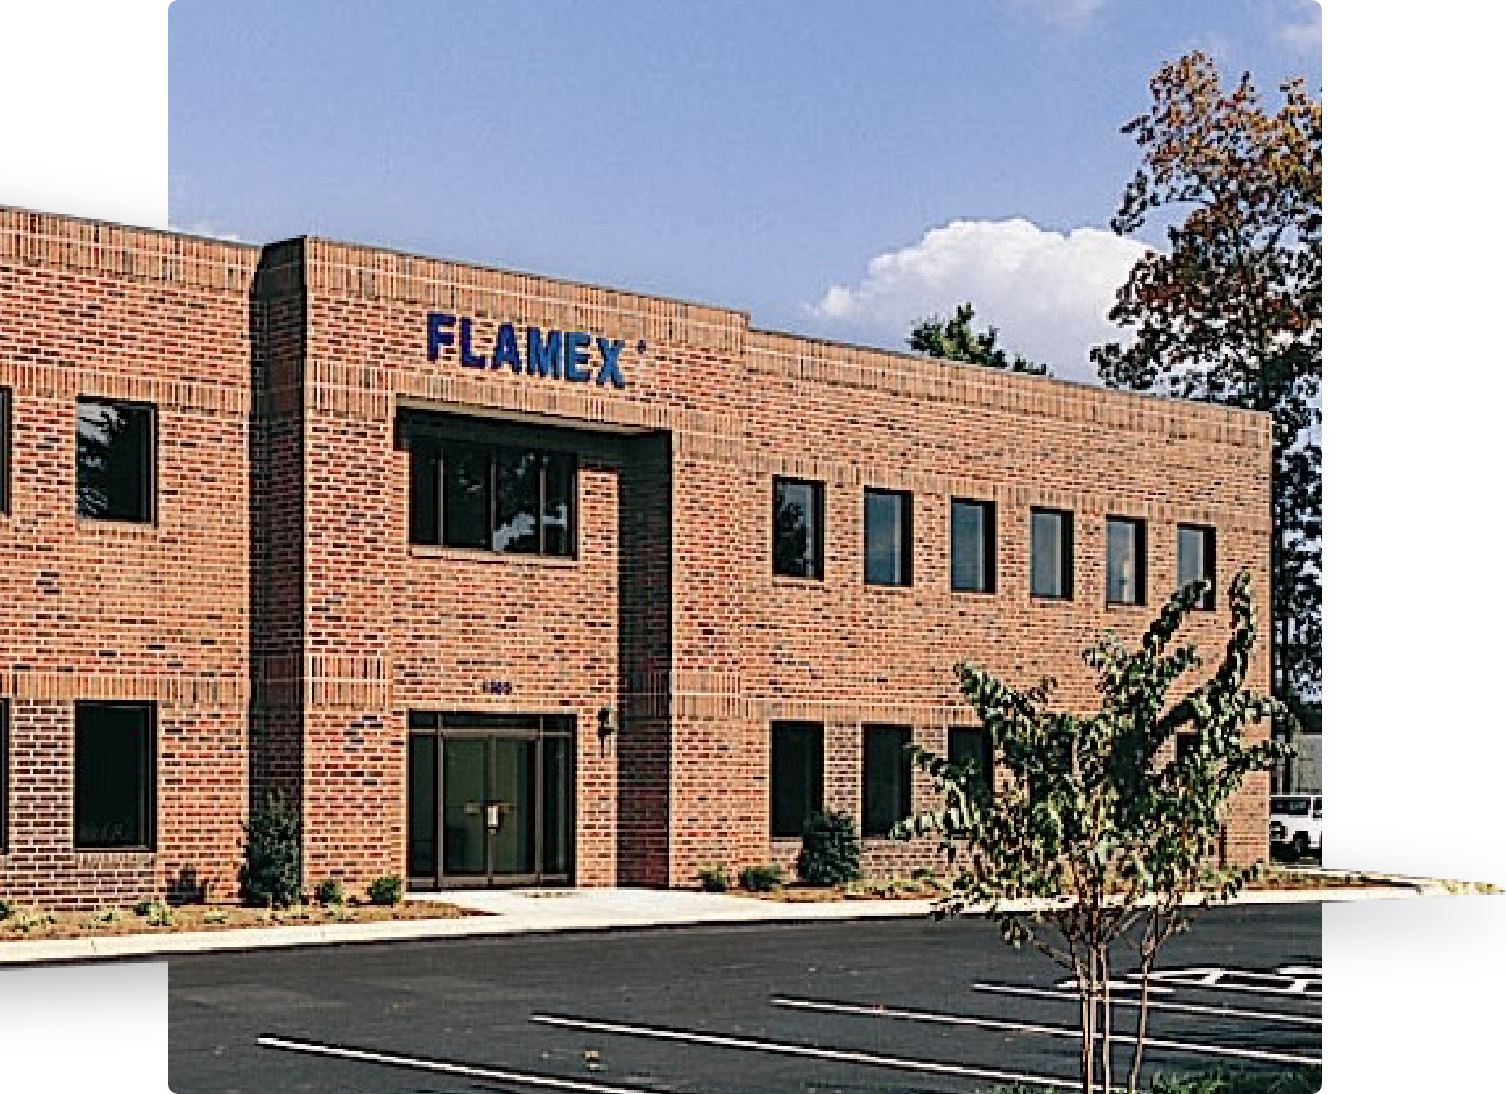 At FLAMEX, we specialize in industrial safety solutions, dust collectors, spark detection, fire hazards.